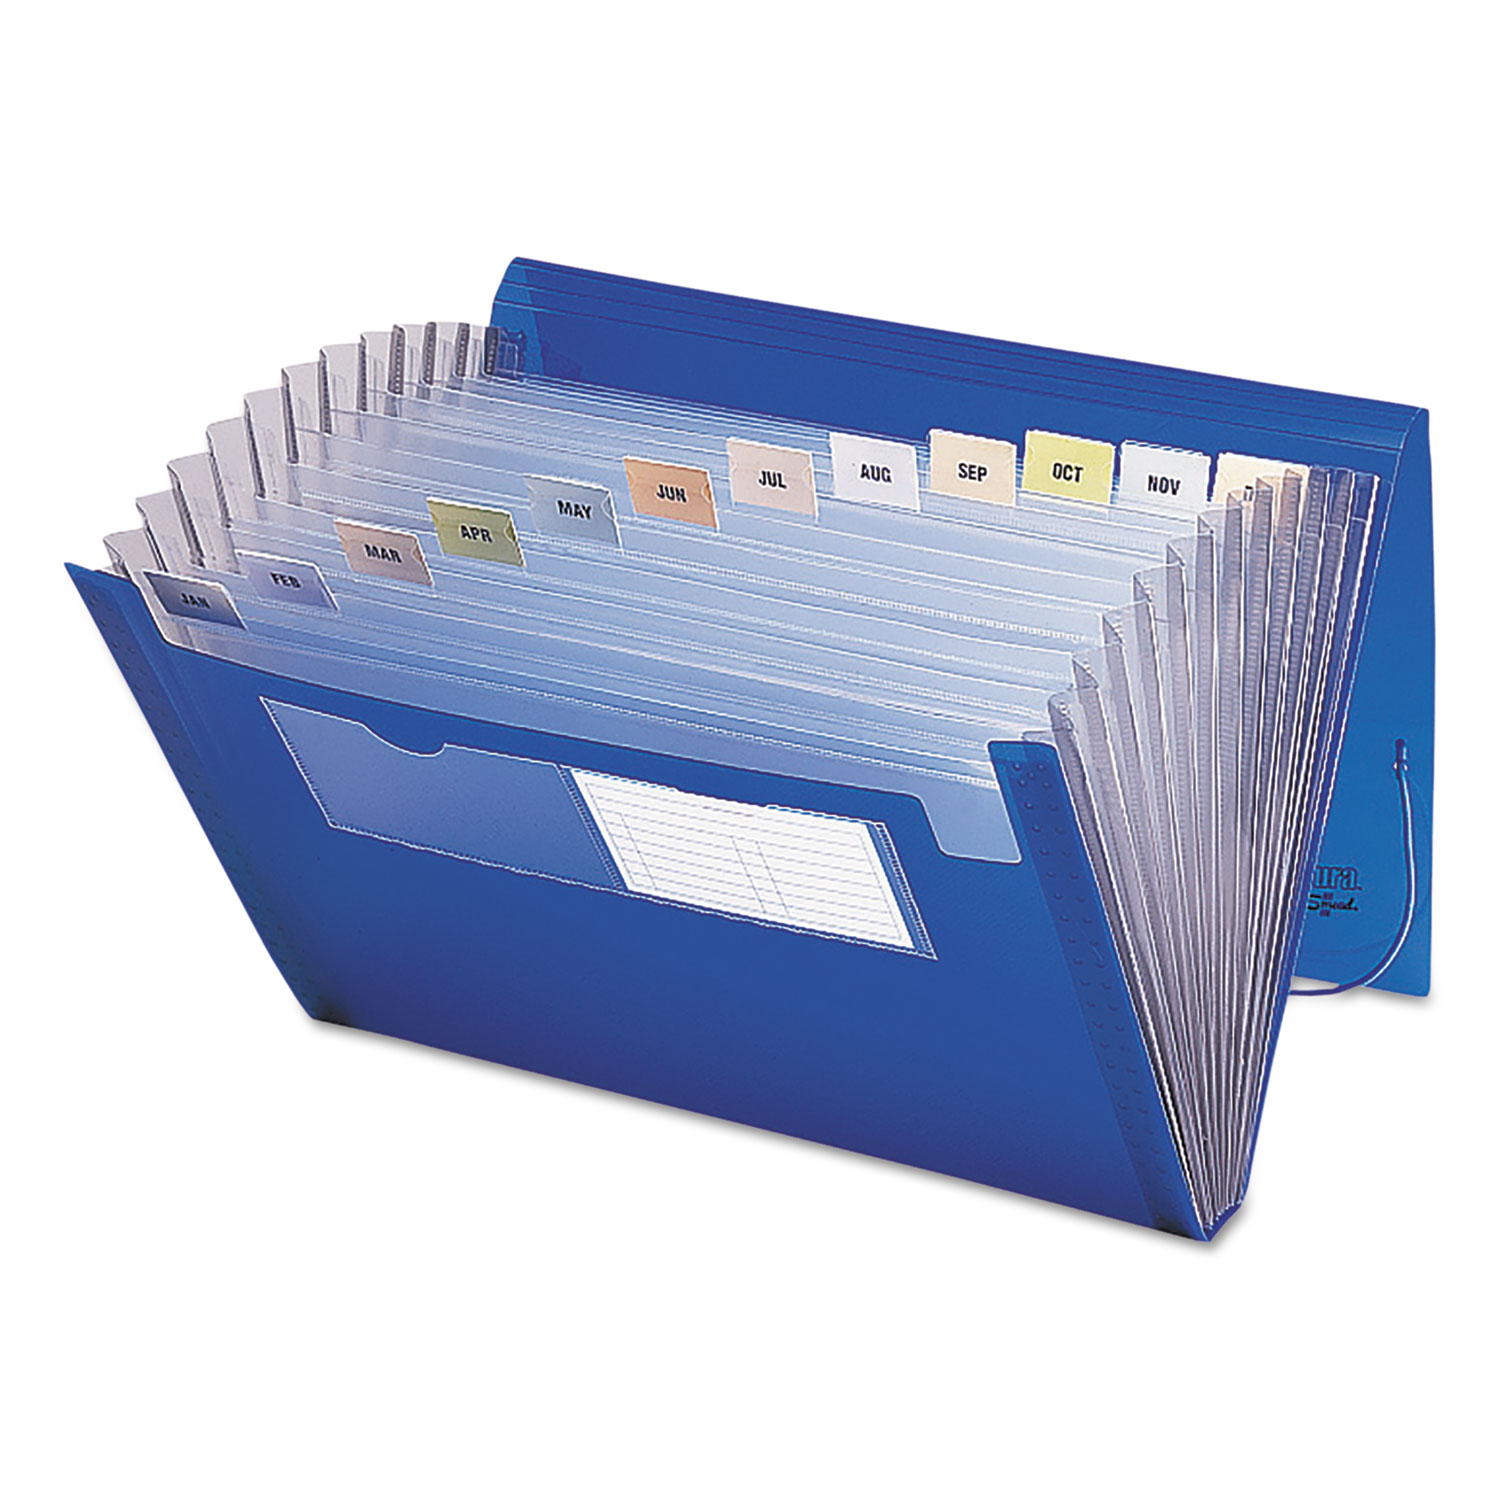  Smead 70876 Expanding File w/ Color Tab Inserts, 12 Sections, Letter Size, Blue (SMD70876) 